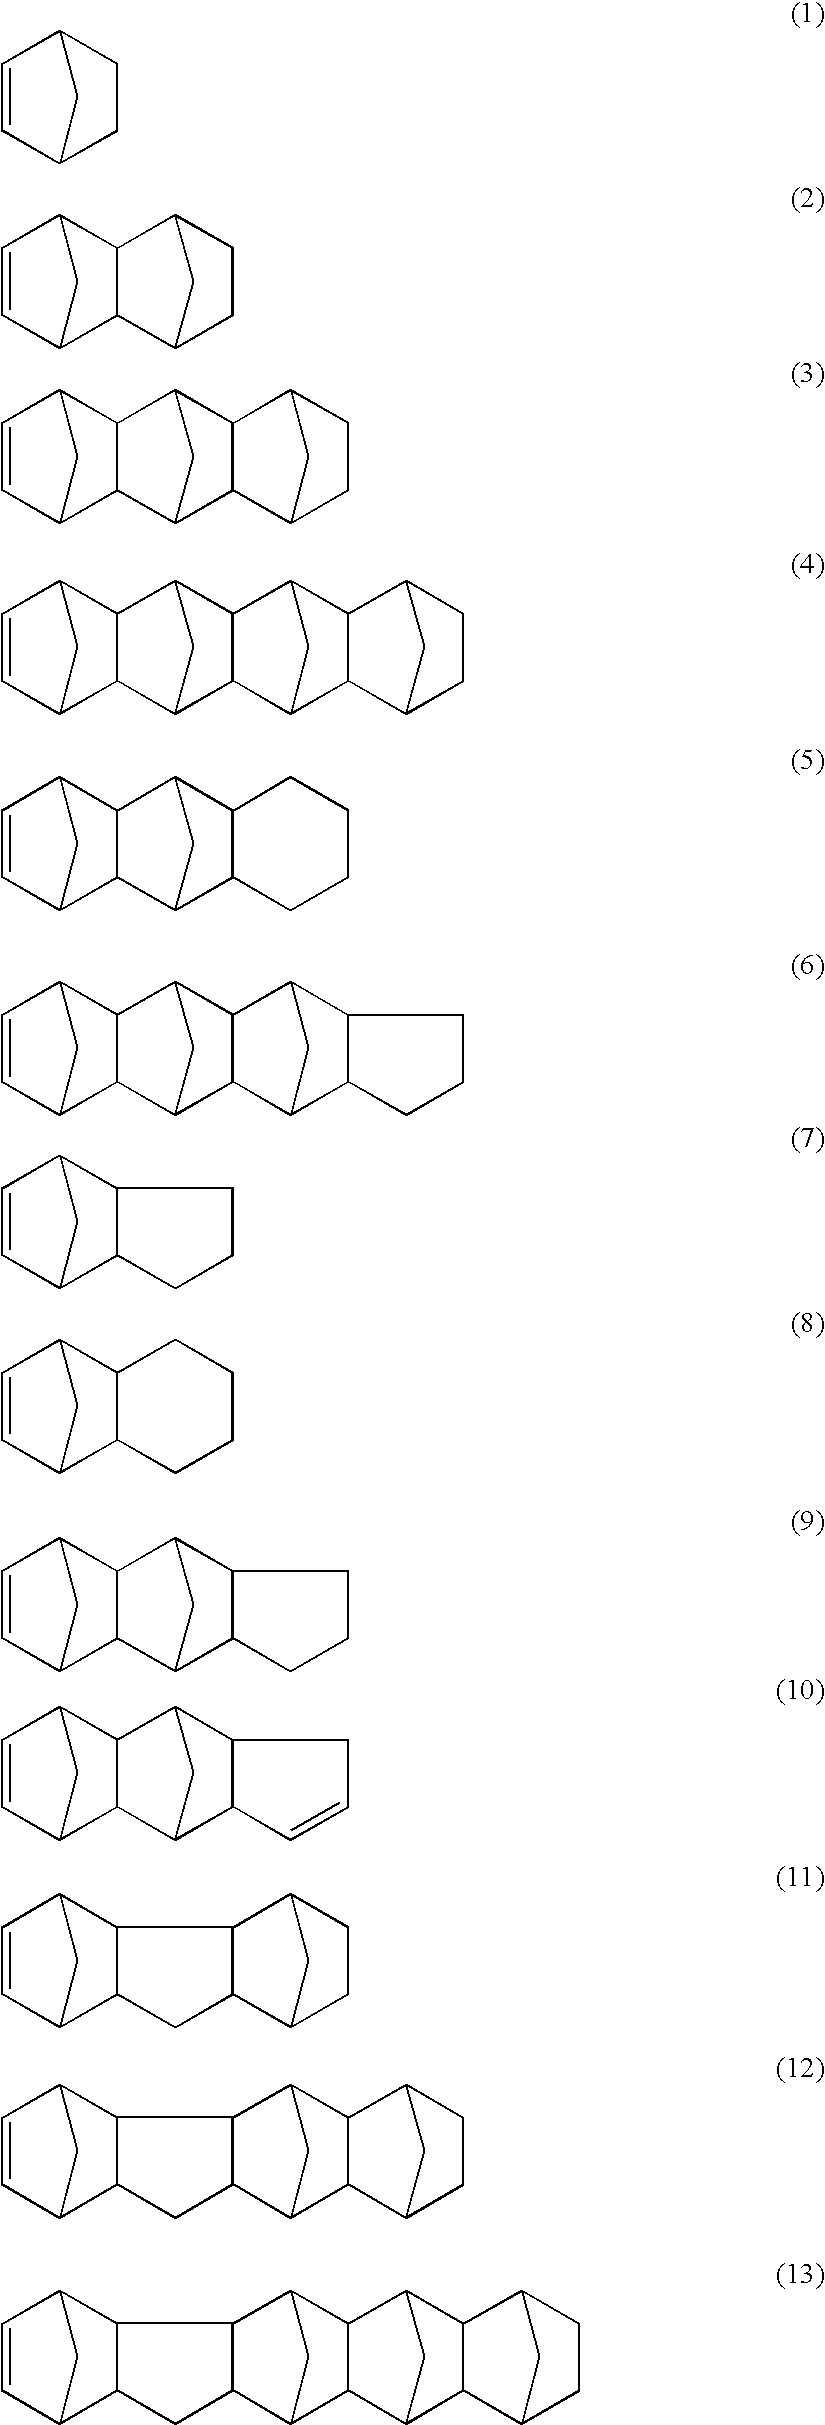 Modified cycloolefin copolymer, process for producing the same, and use of the polymer